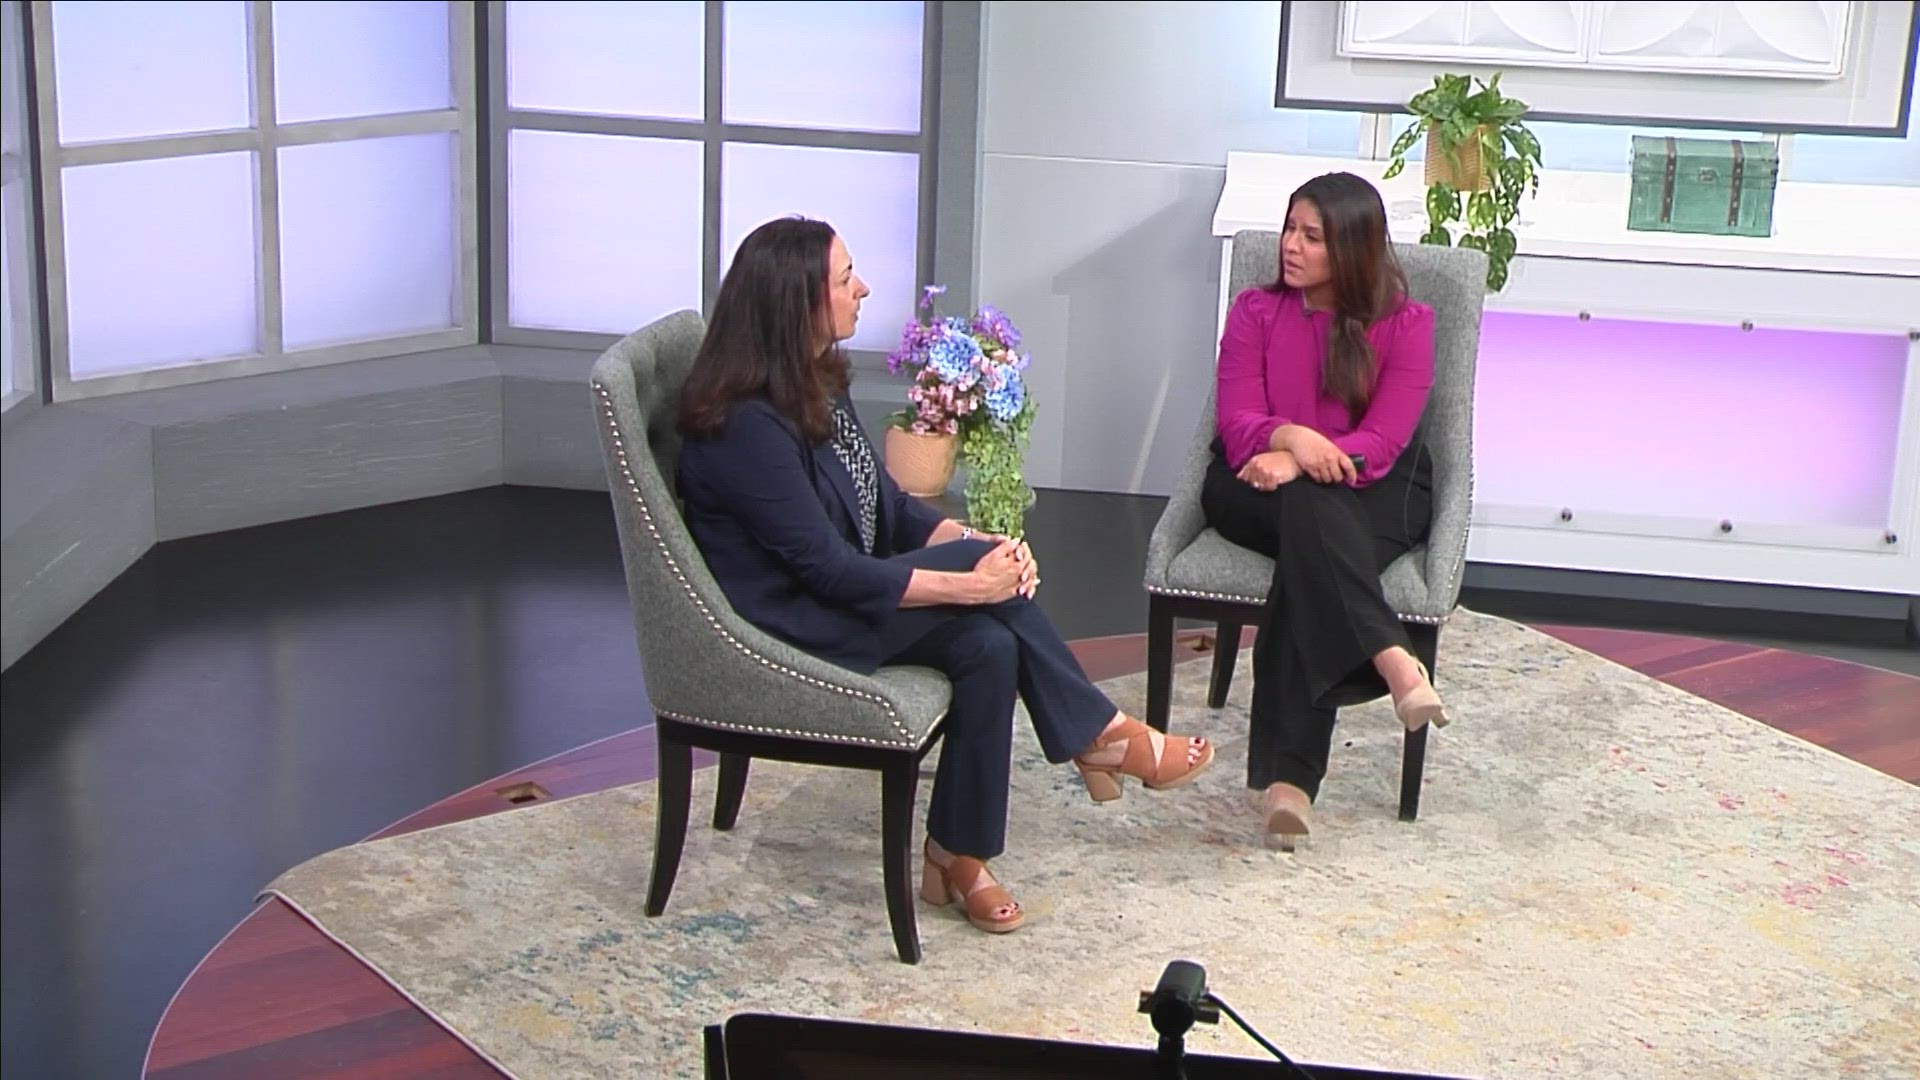 Nearly 20% of women are unable to conceive after a year of trying. Dr. Cindy long with Women's Health Group at North Suburban joined to talk about treatment options.